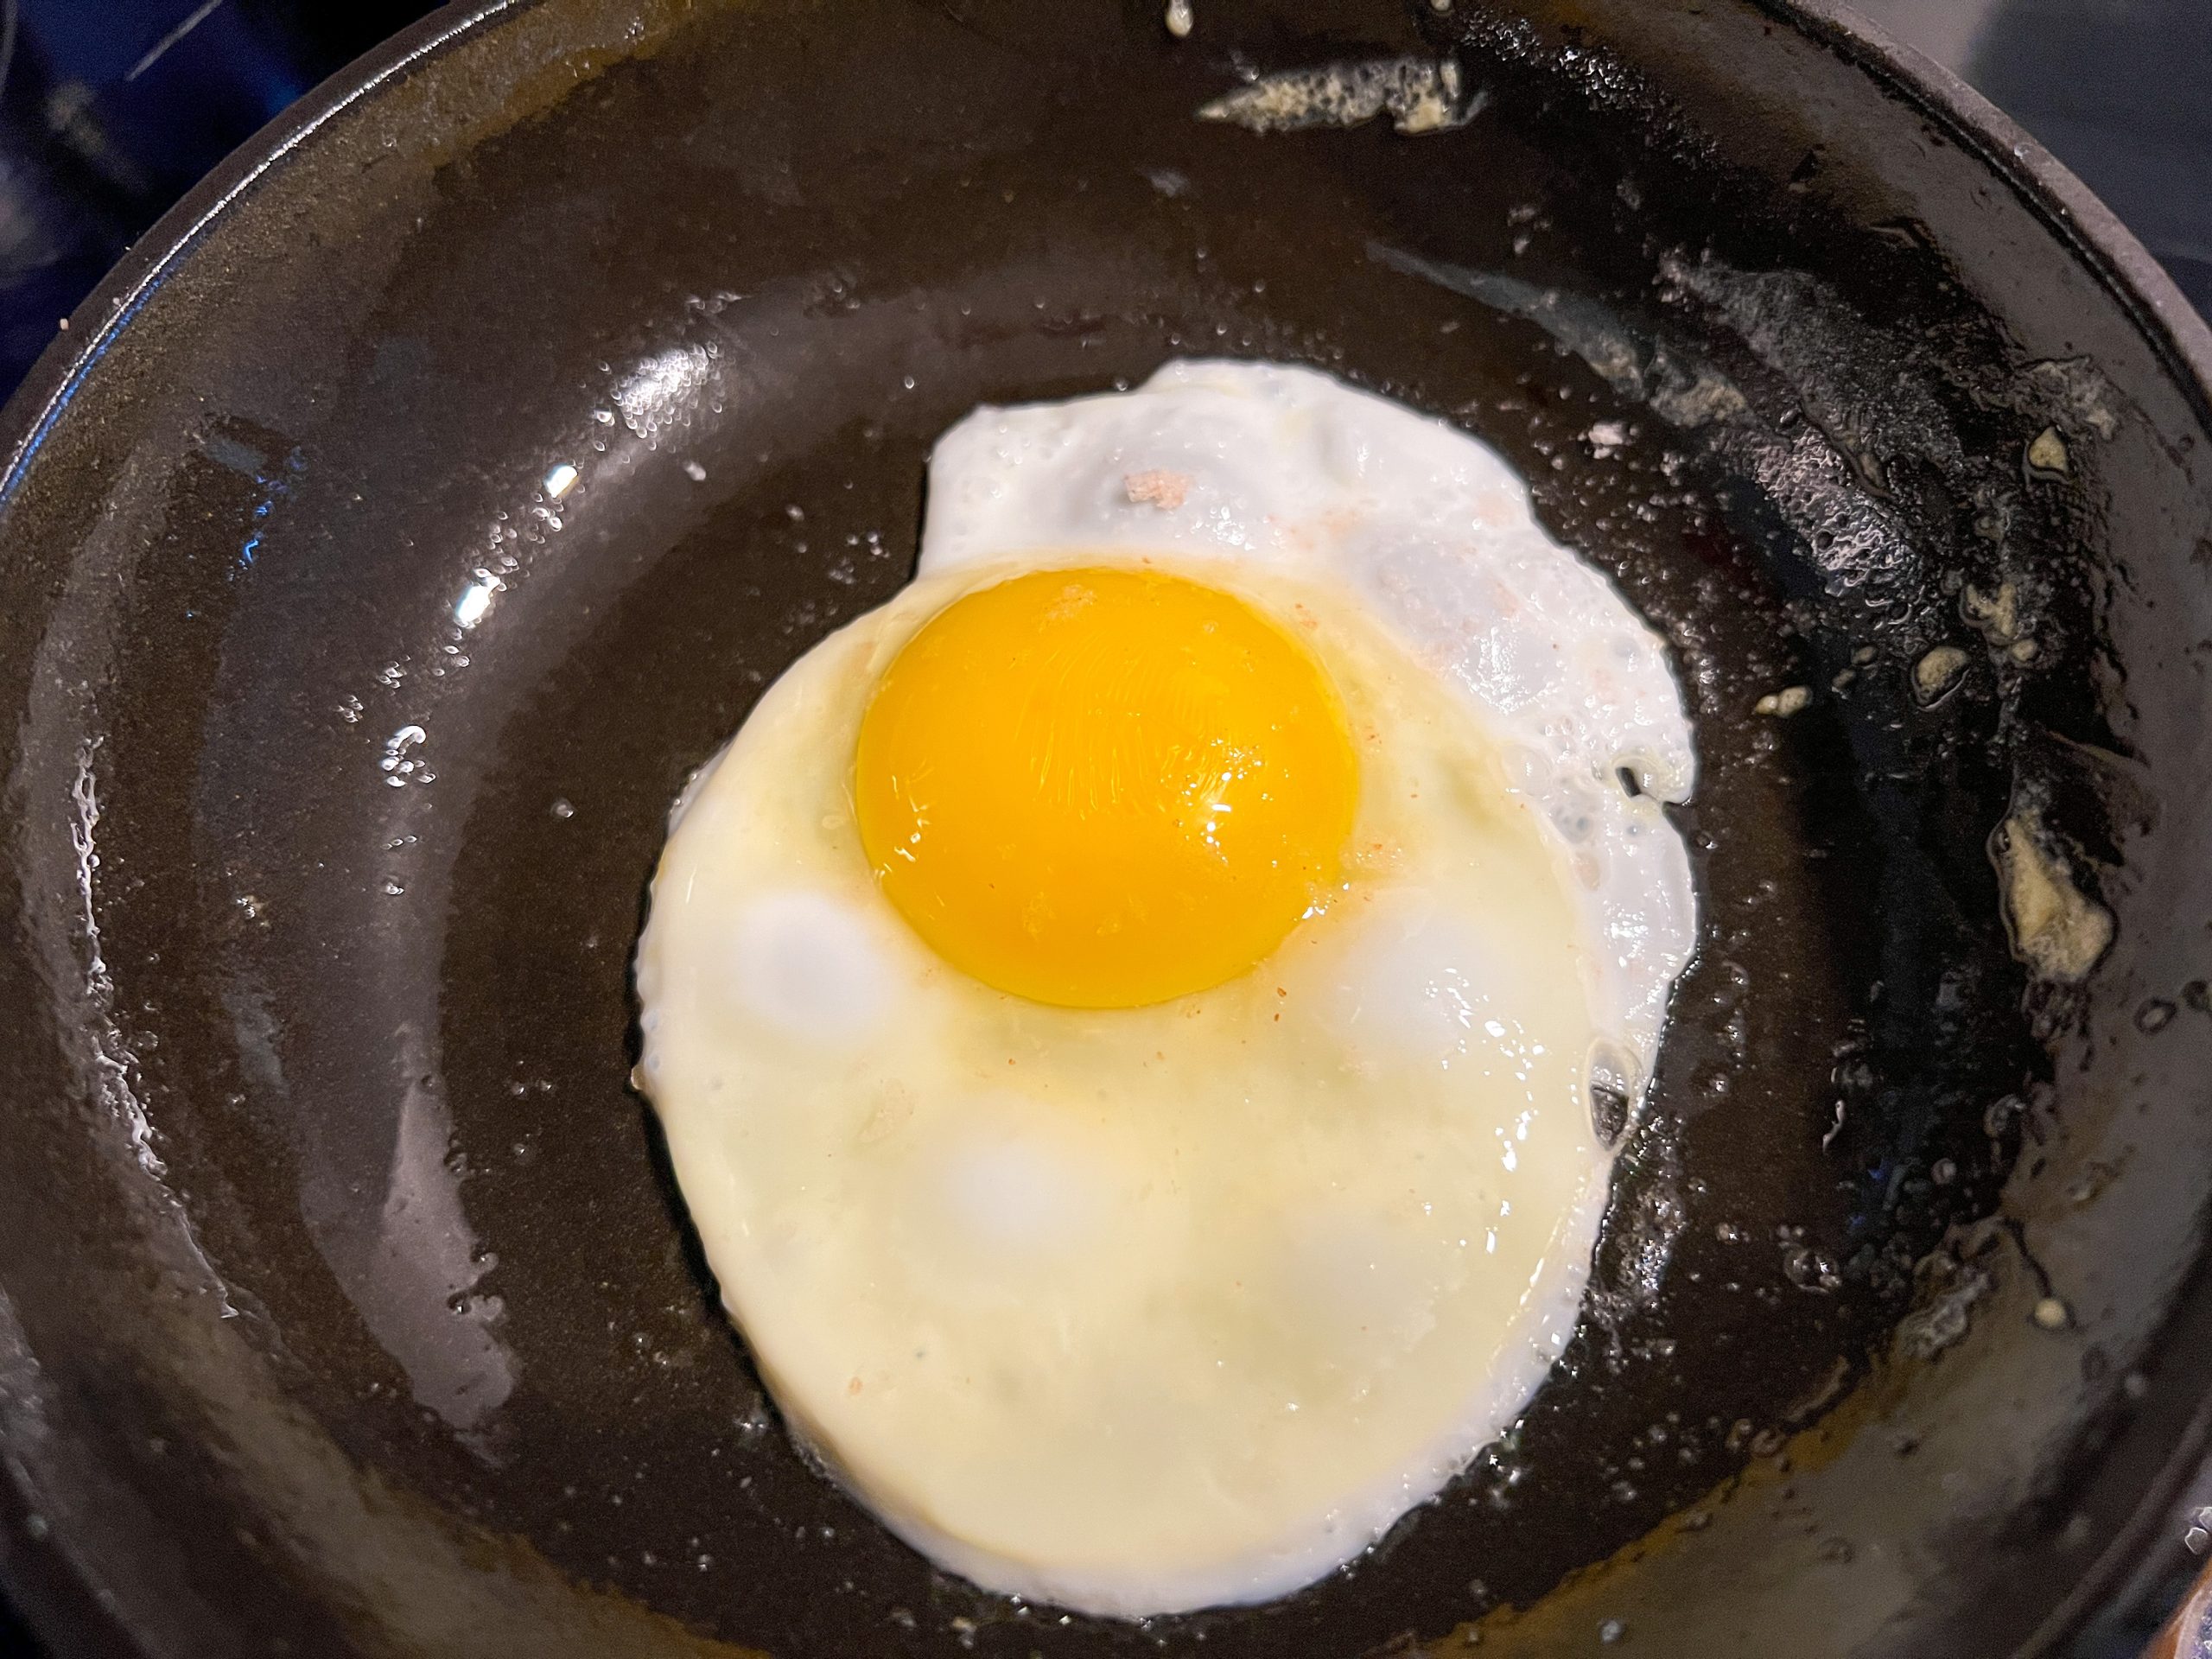 You don't have to scramble your eggs. If you prefer, you can cook them another wide, like sunny side up, over hard, etc.